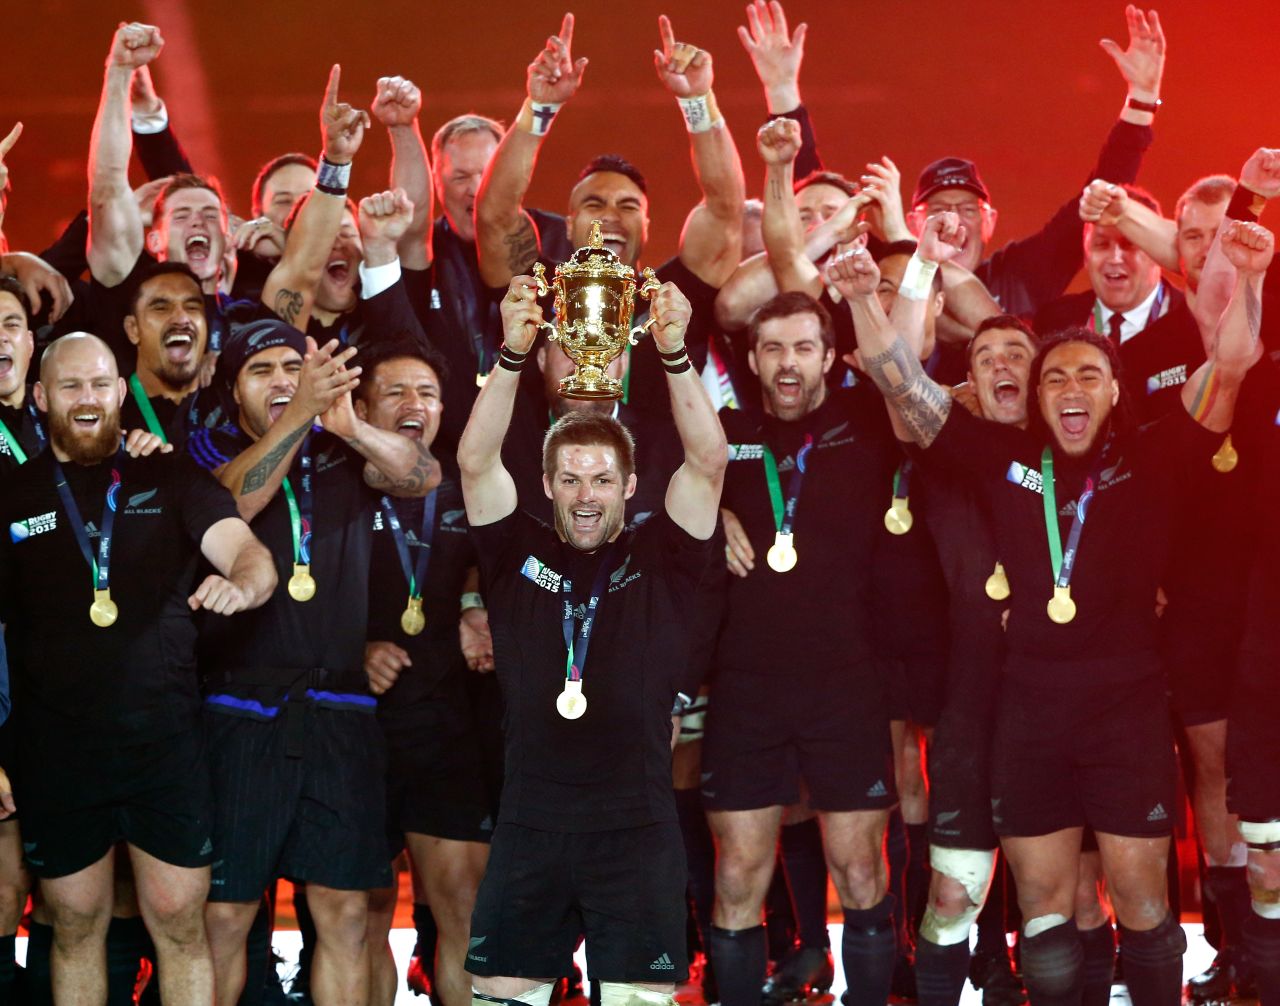 New Zealand beat Australia 34-17 to win its second straight Rugby World Cup at Twickenham Stadium, London in October 2015. Four years on, the focus will shift to Japan, where 12 stadiums throughout the country will host the tournament from September 20 to November 2.  